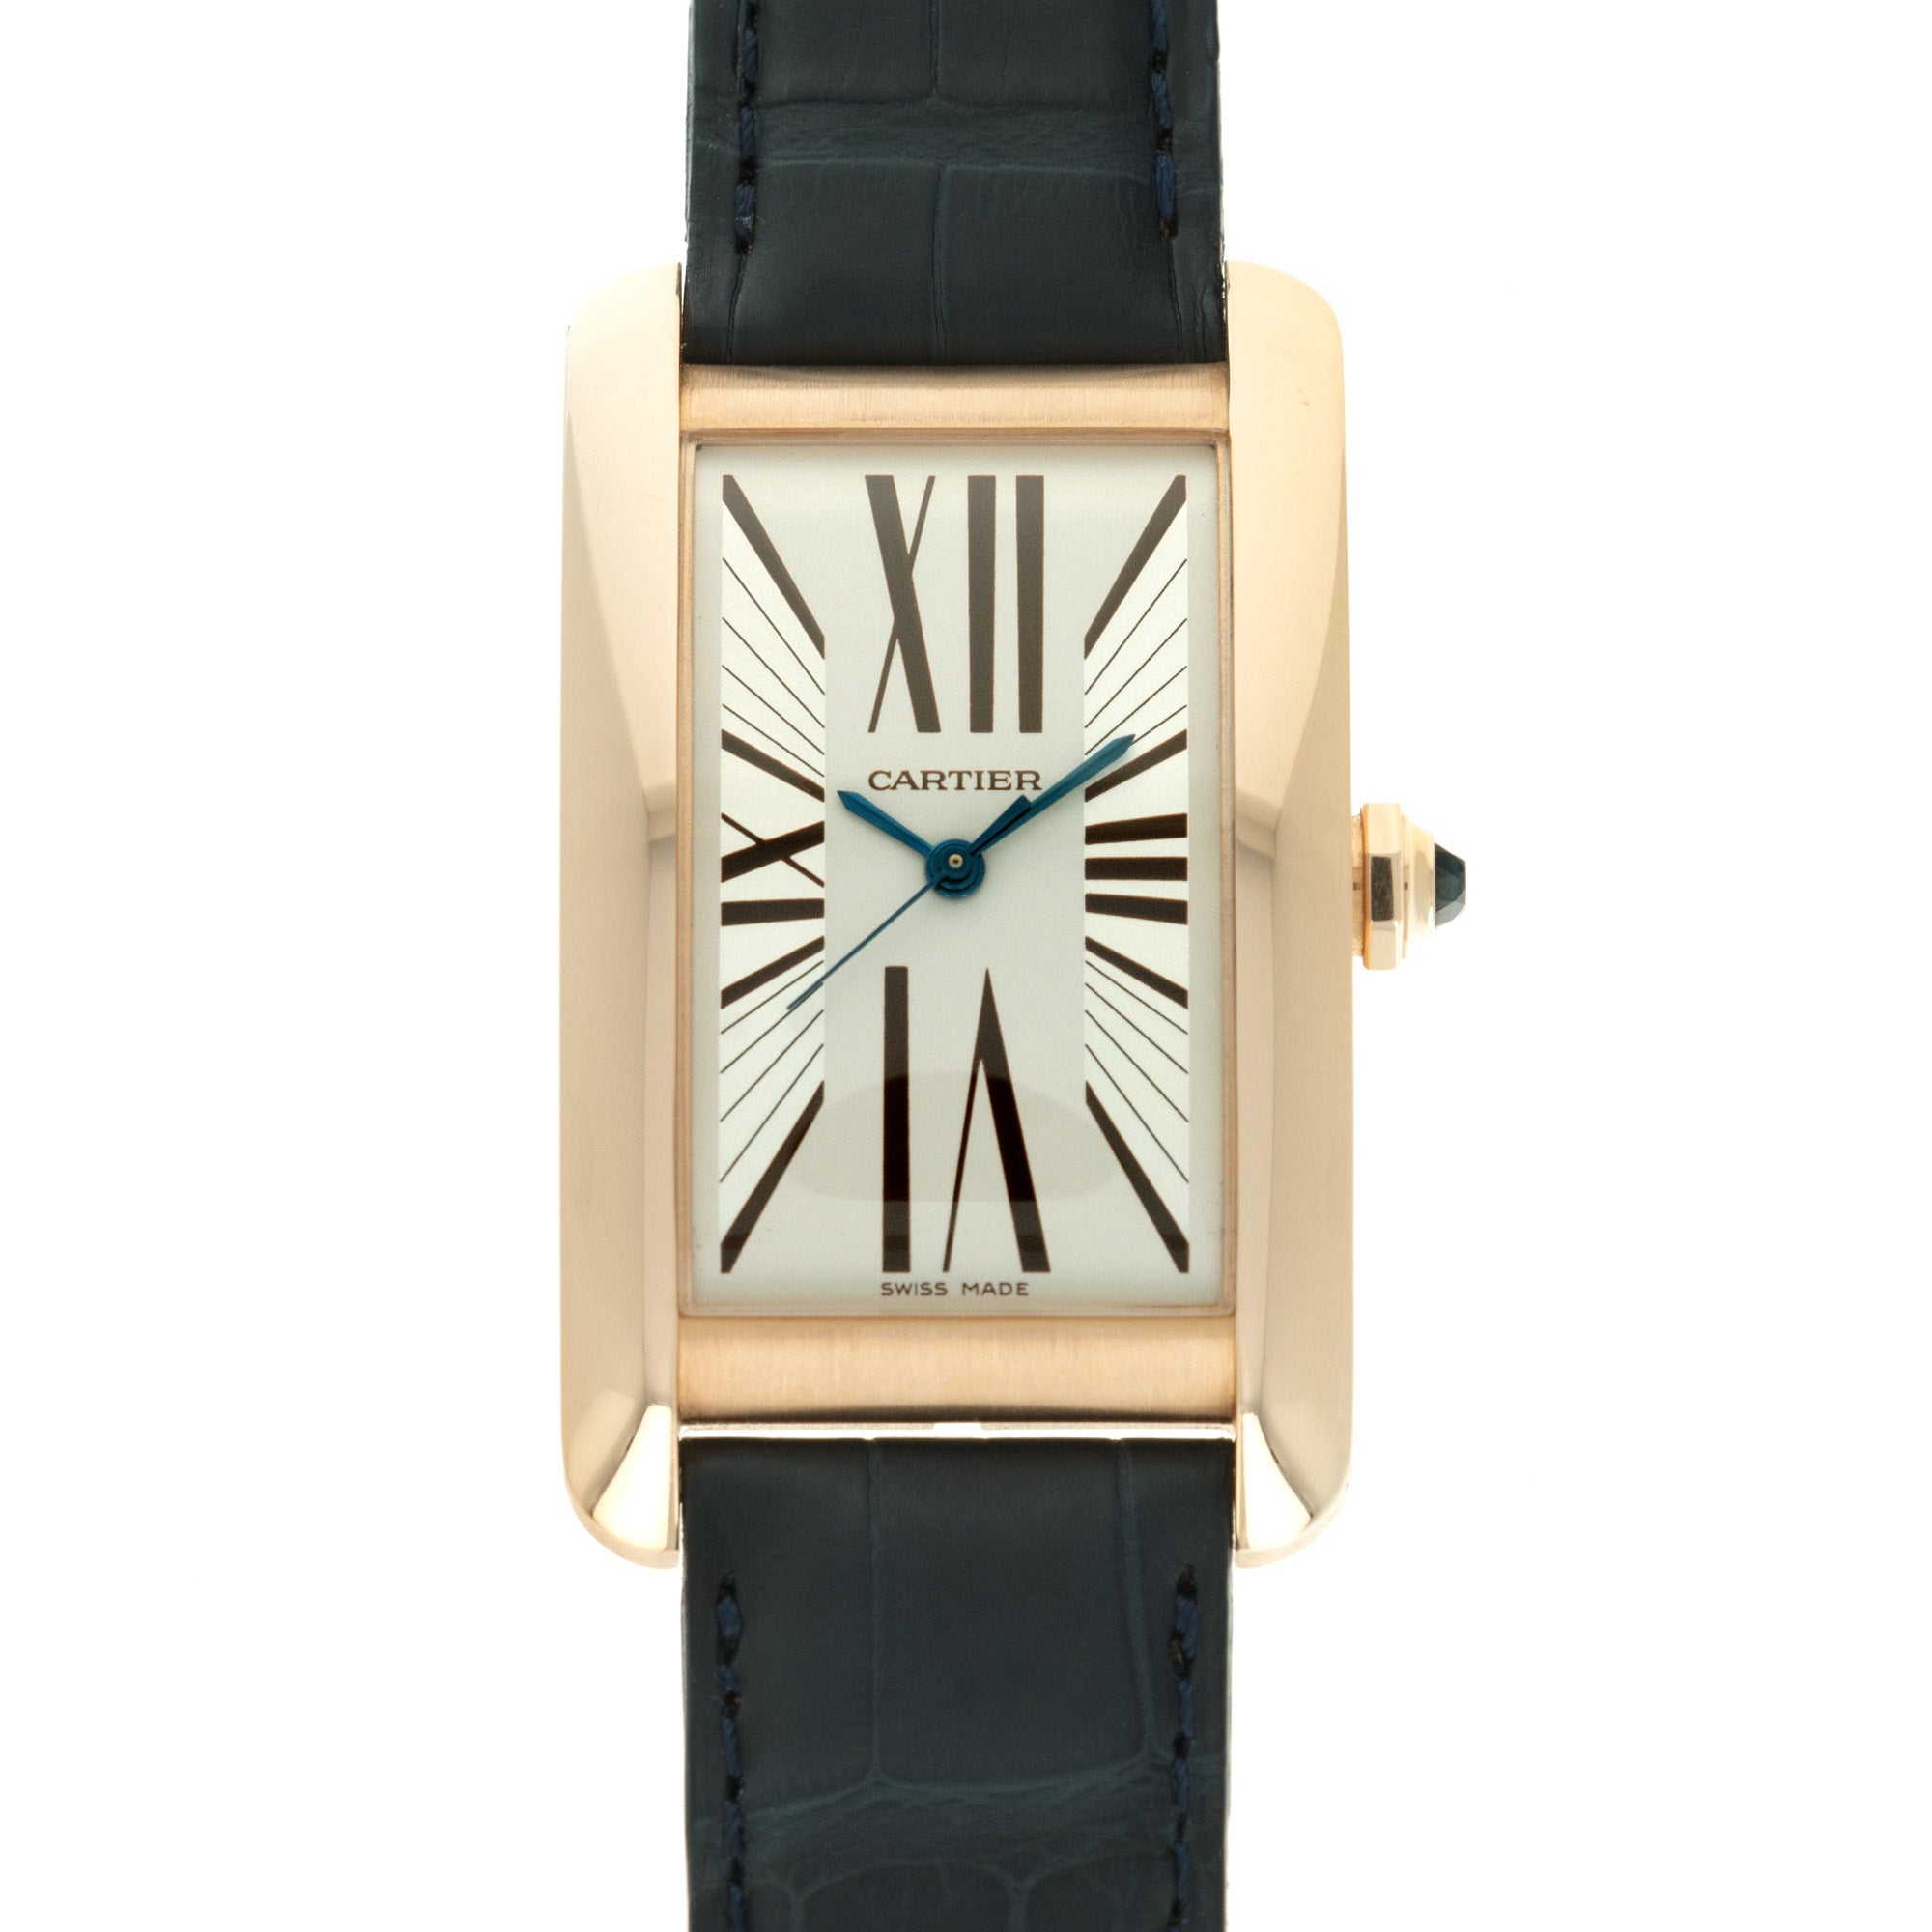 Cartier Tank Americaine 18k Rose Gold Automatic Watch W2609156 2505